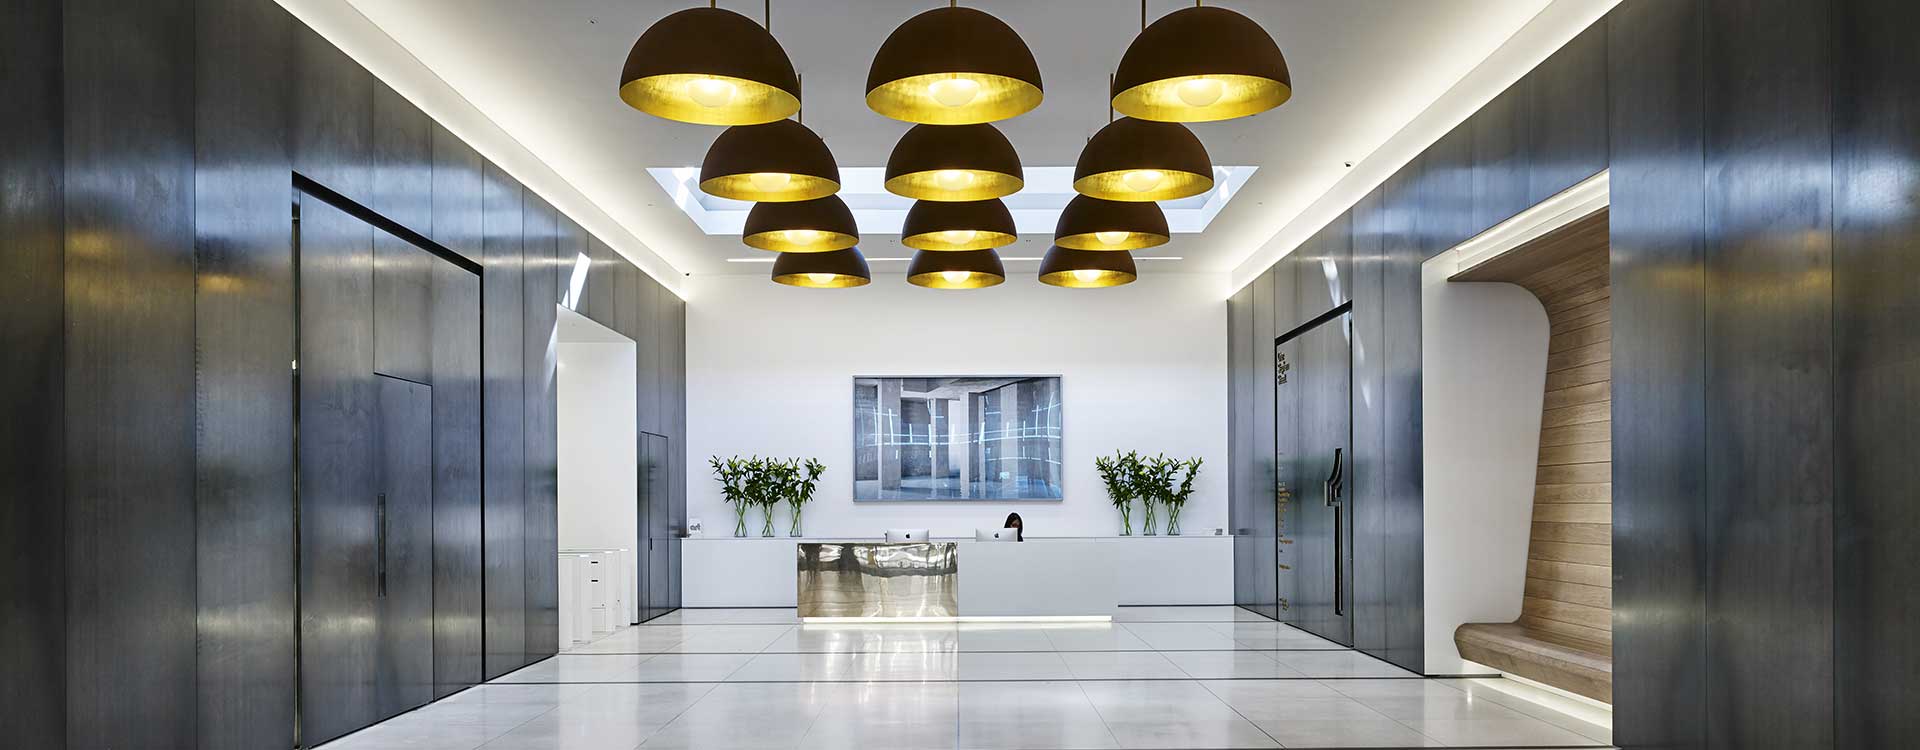 led lighting in central cross office complex